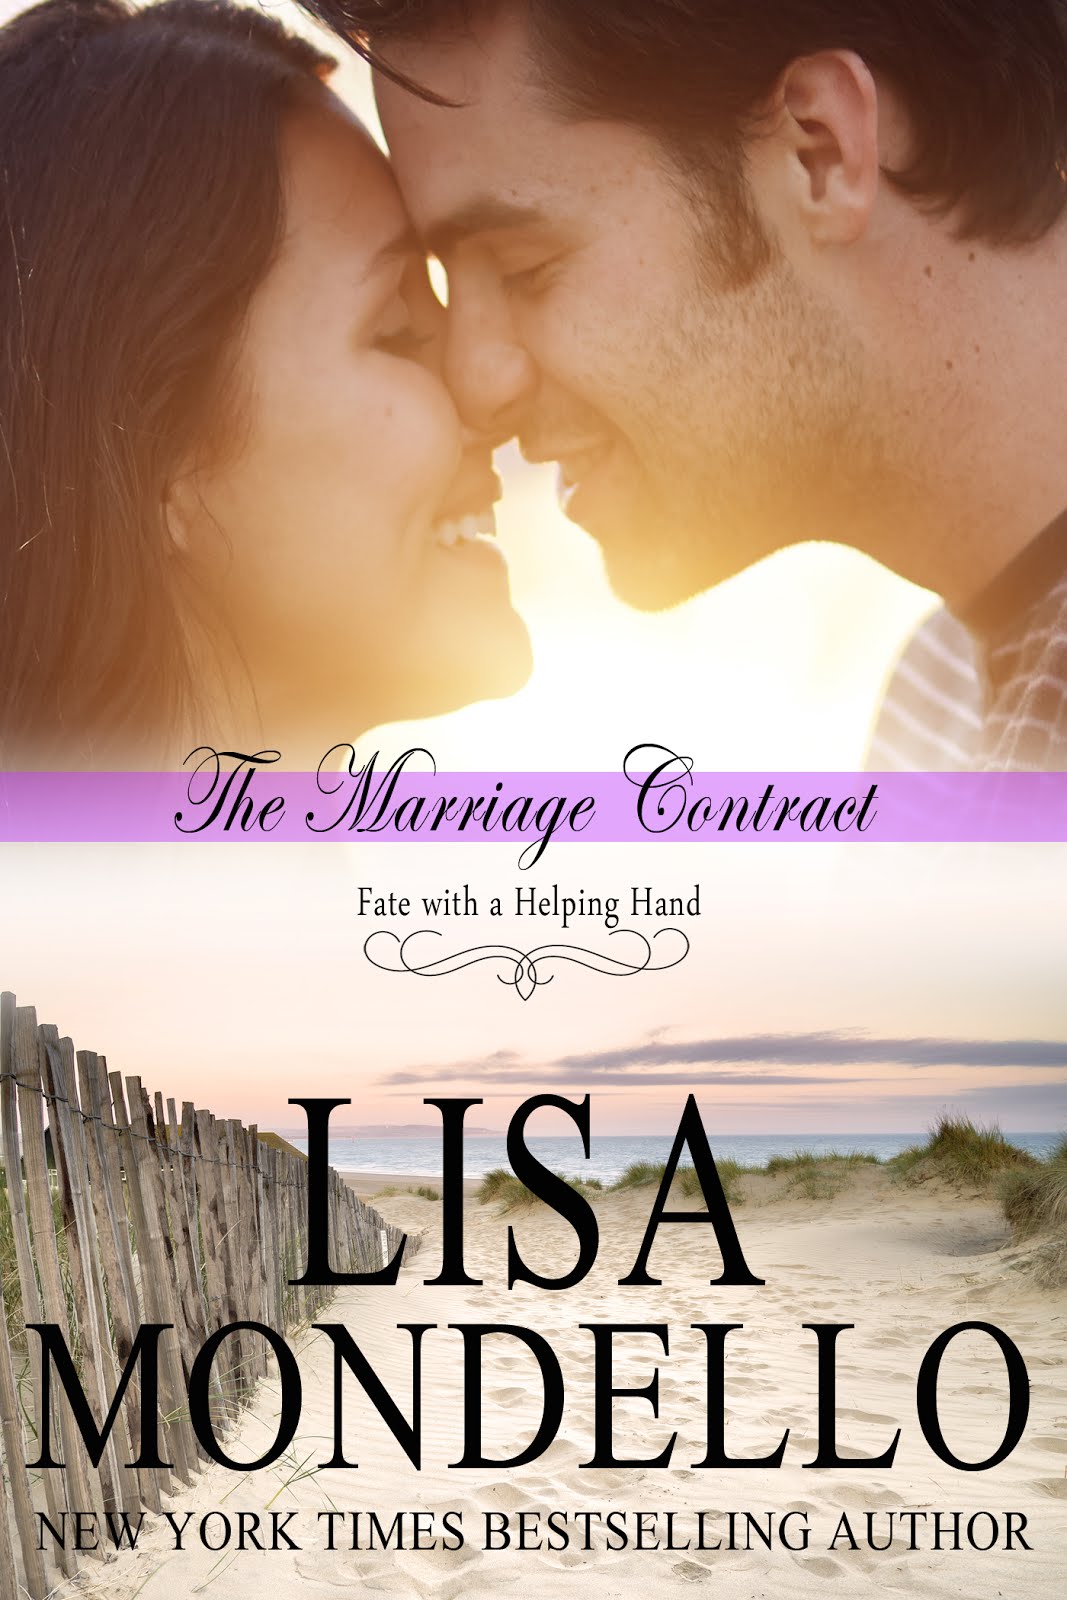 THE MARRIAGE CONTRACT has a new Cover!